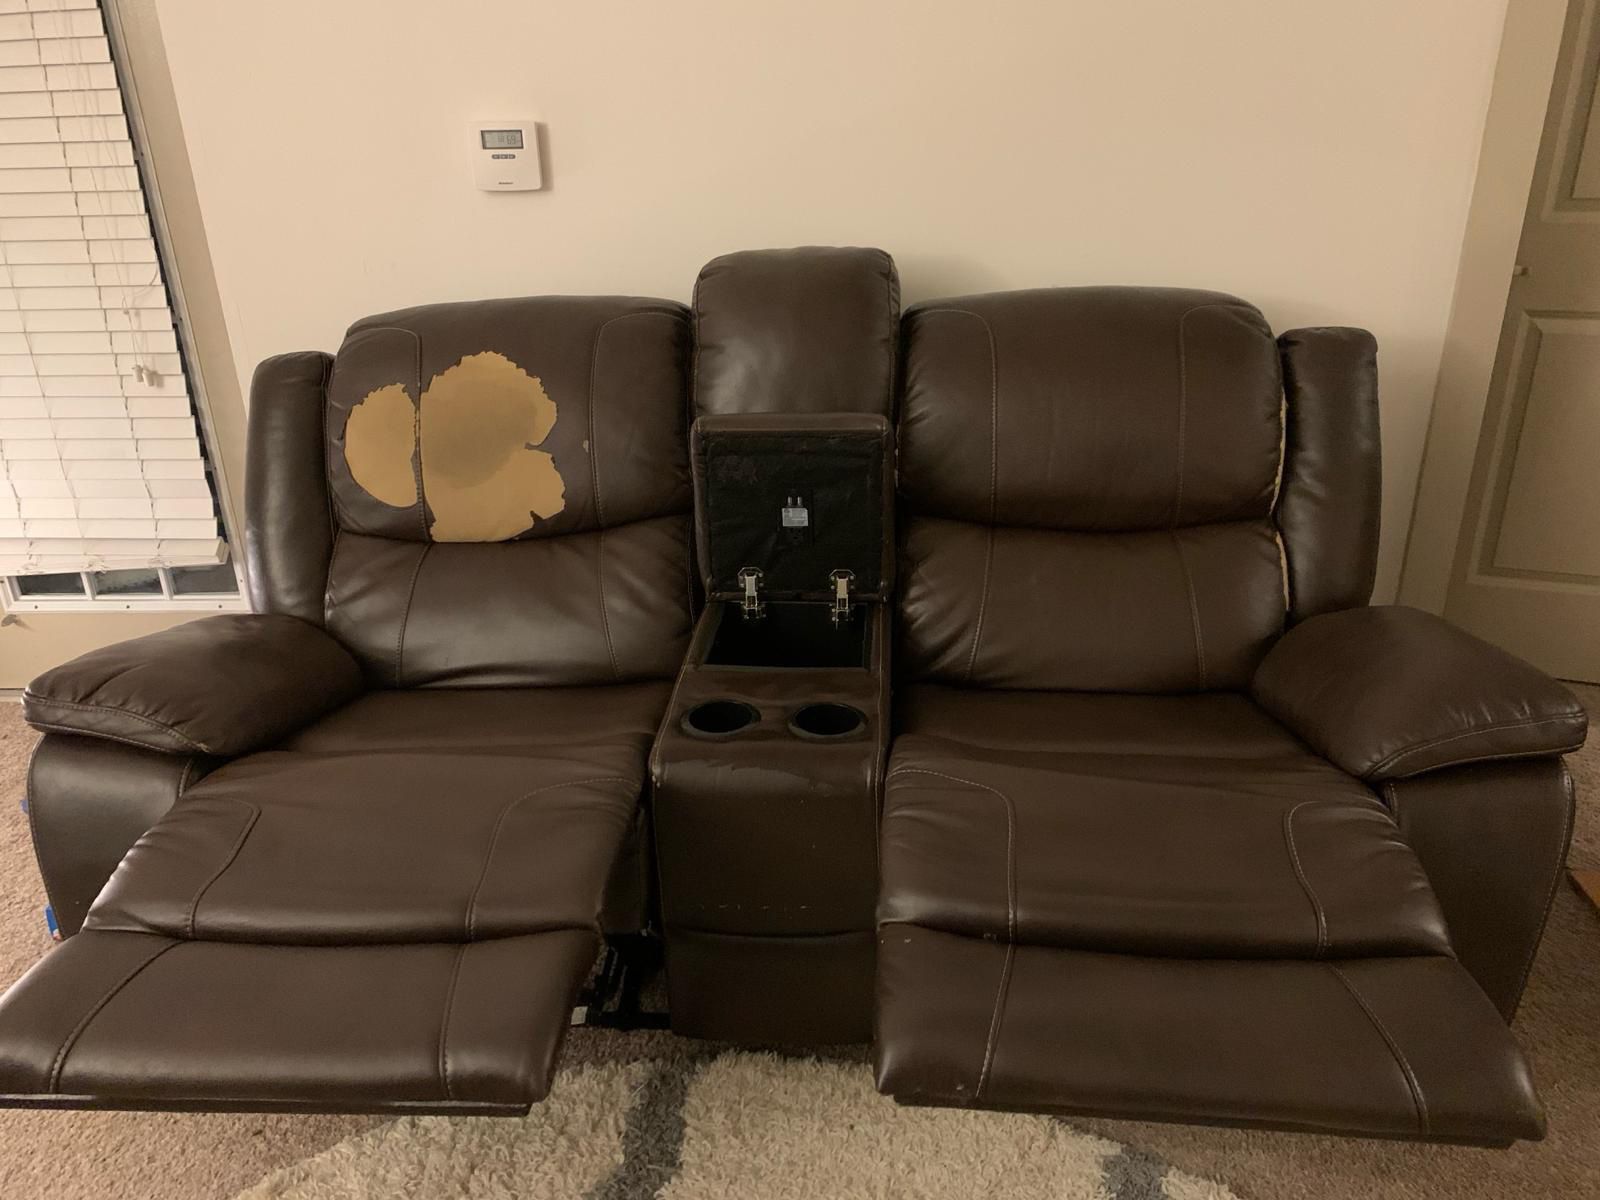 Recliner couch / love seat